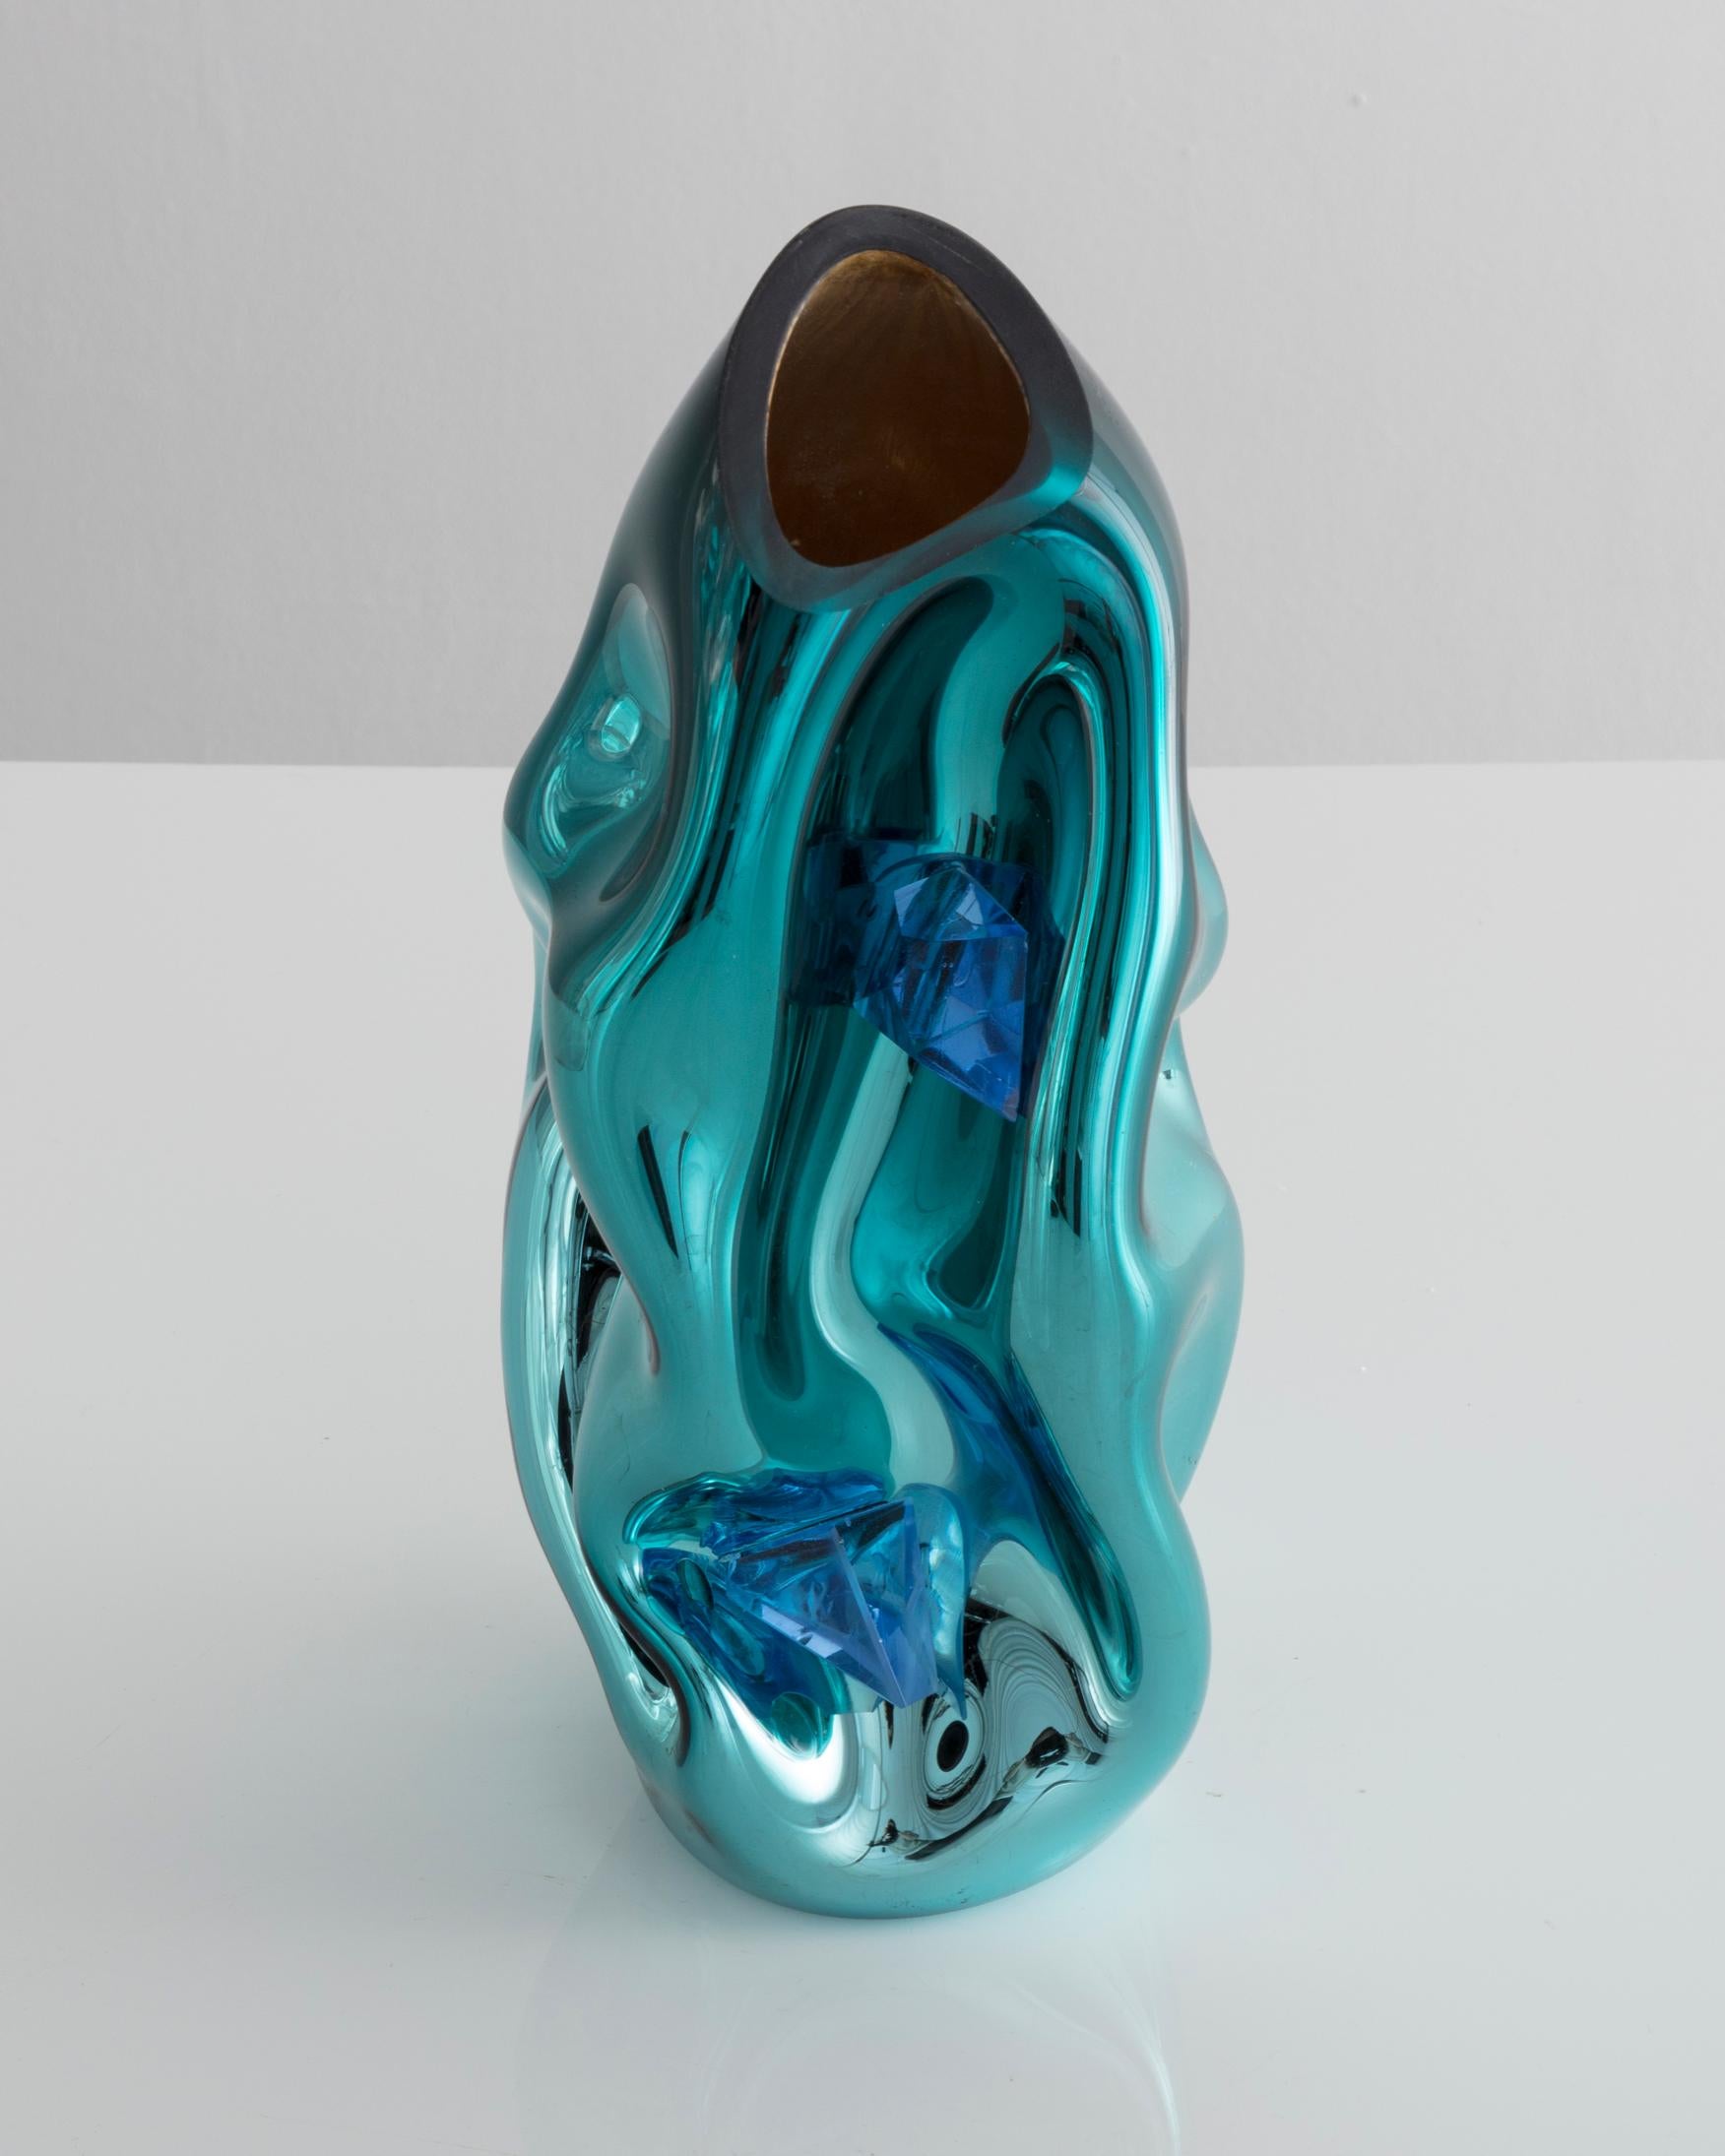 American Petit Crumpled Vessel in Silver and Turquoise Hand Blown Glass by Jeff Zimmerman